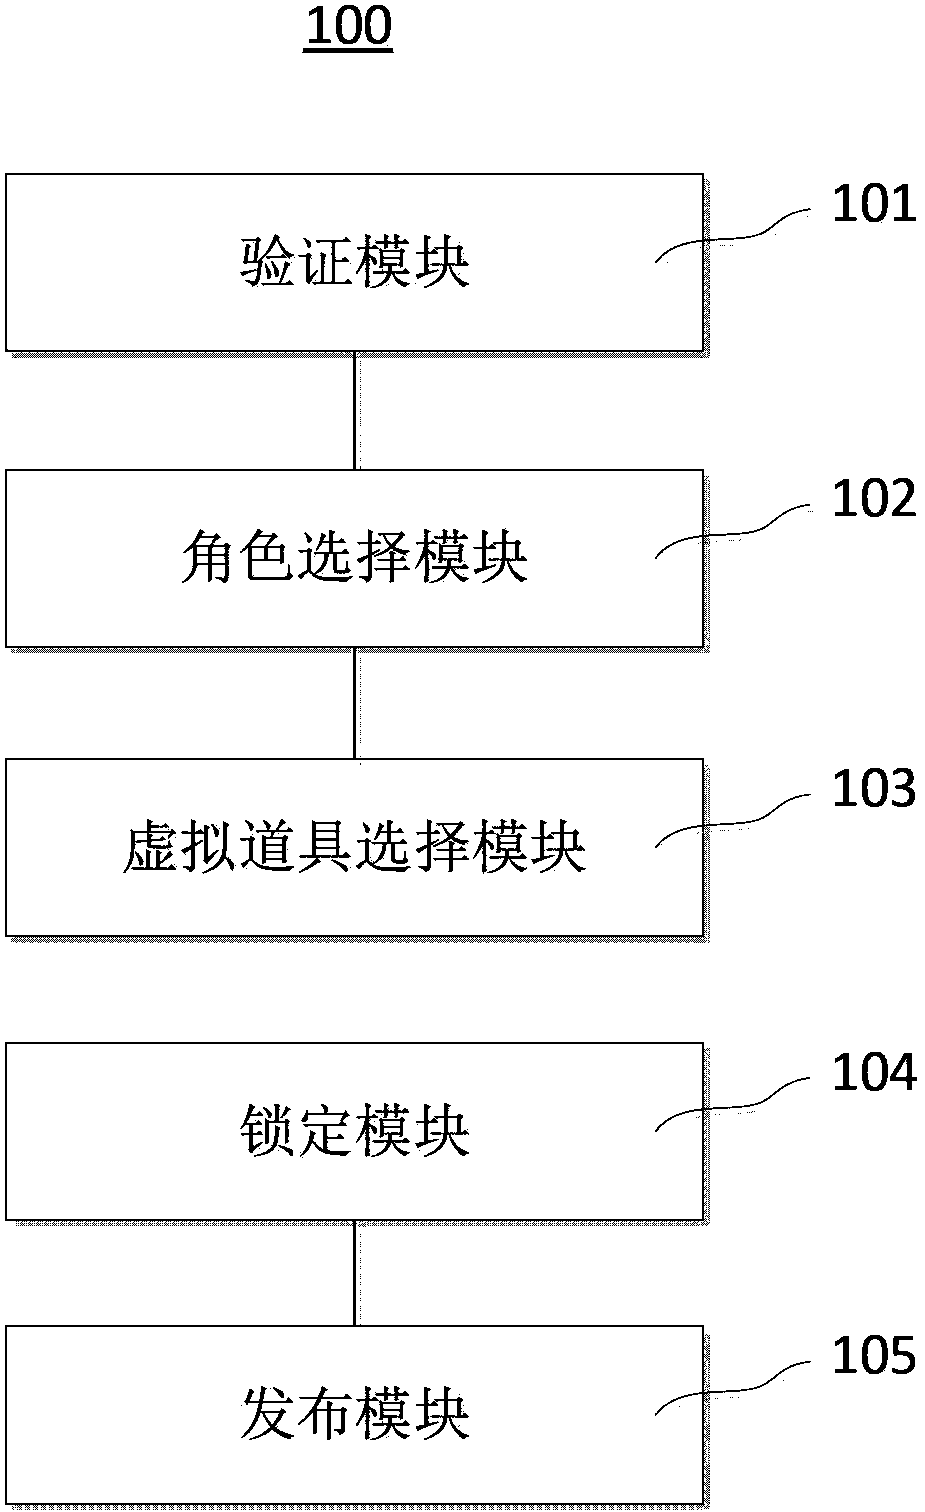 Online application virtual resource issuing method and device